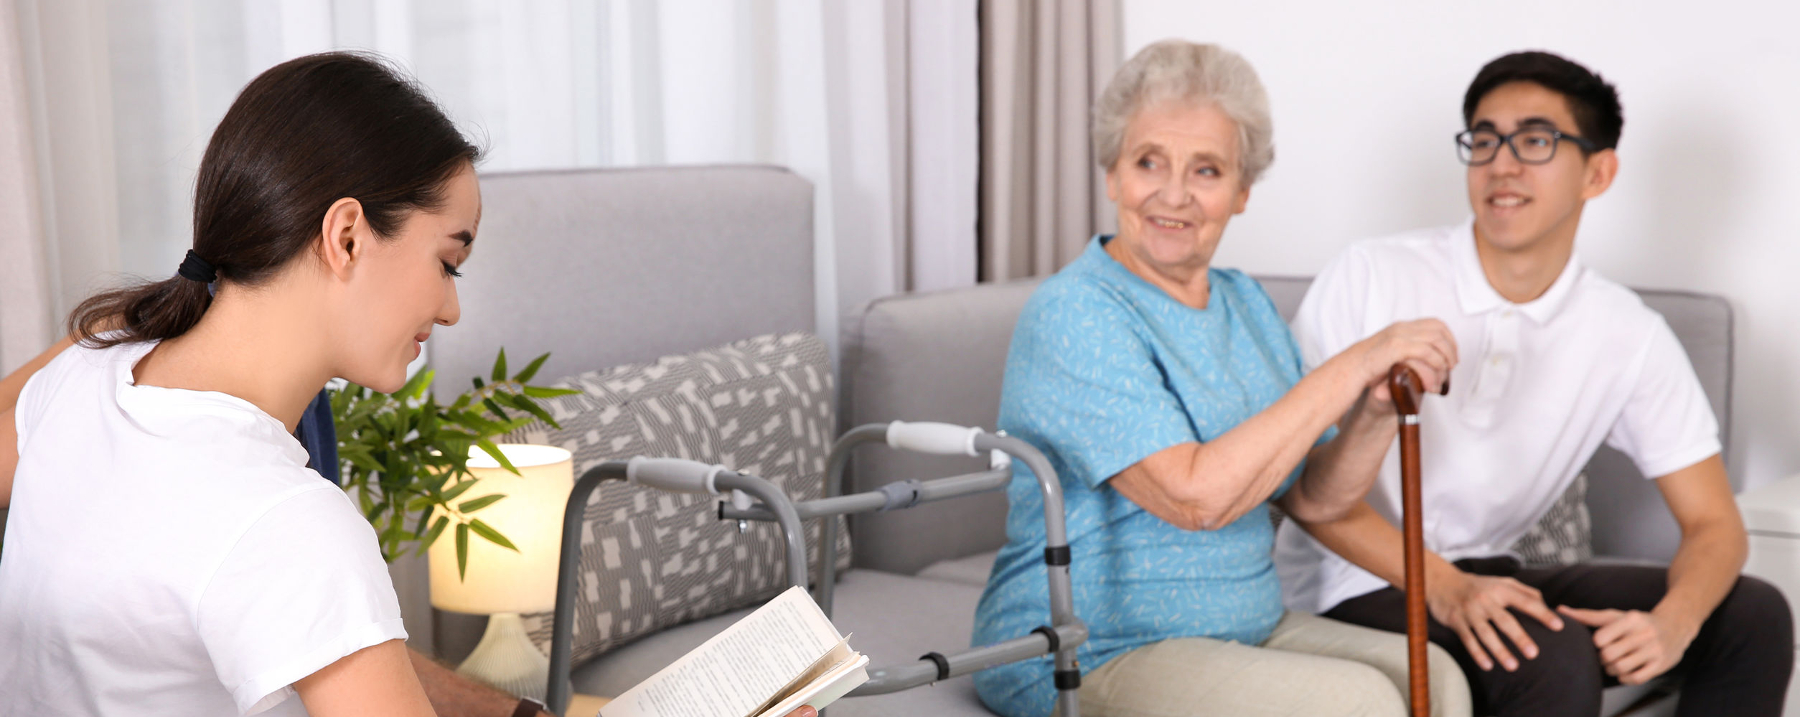 Our Commitment: To Assist Seniors In Their Care With The Dignity And Respect They Deserve